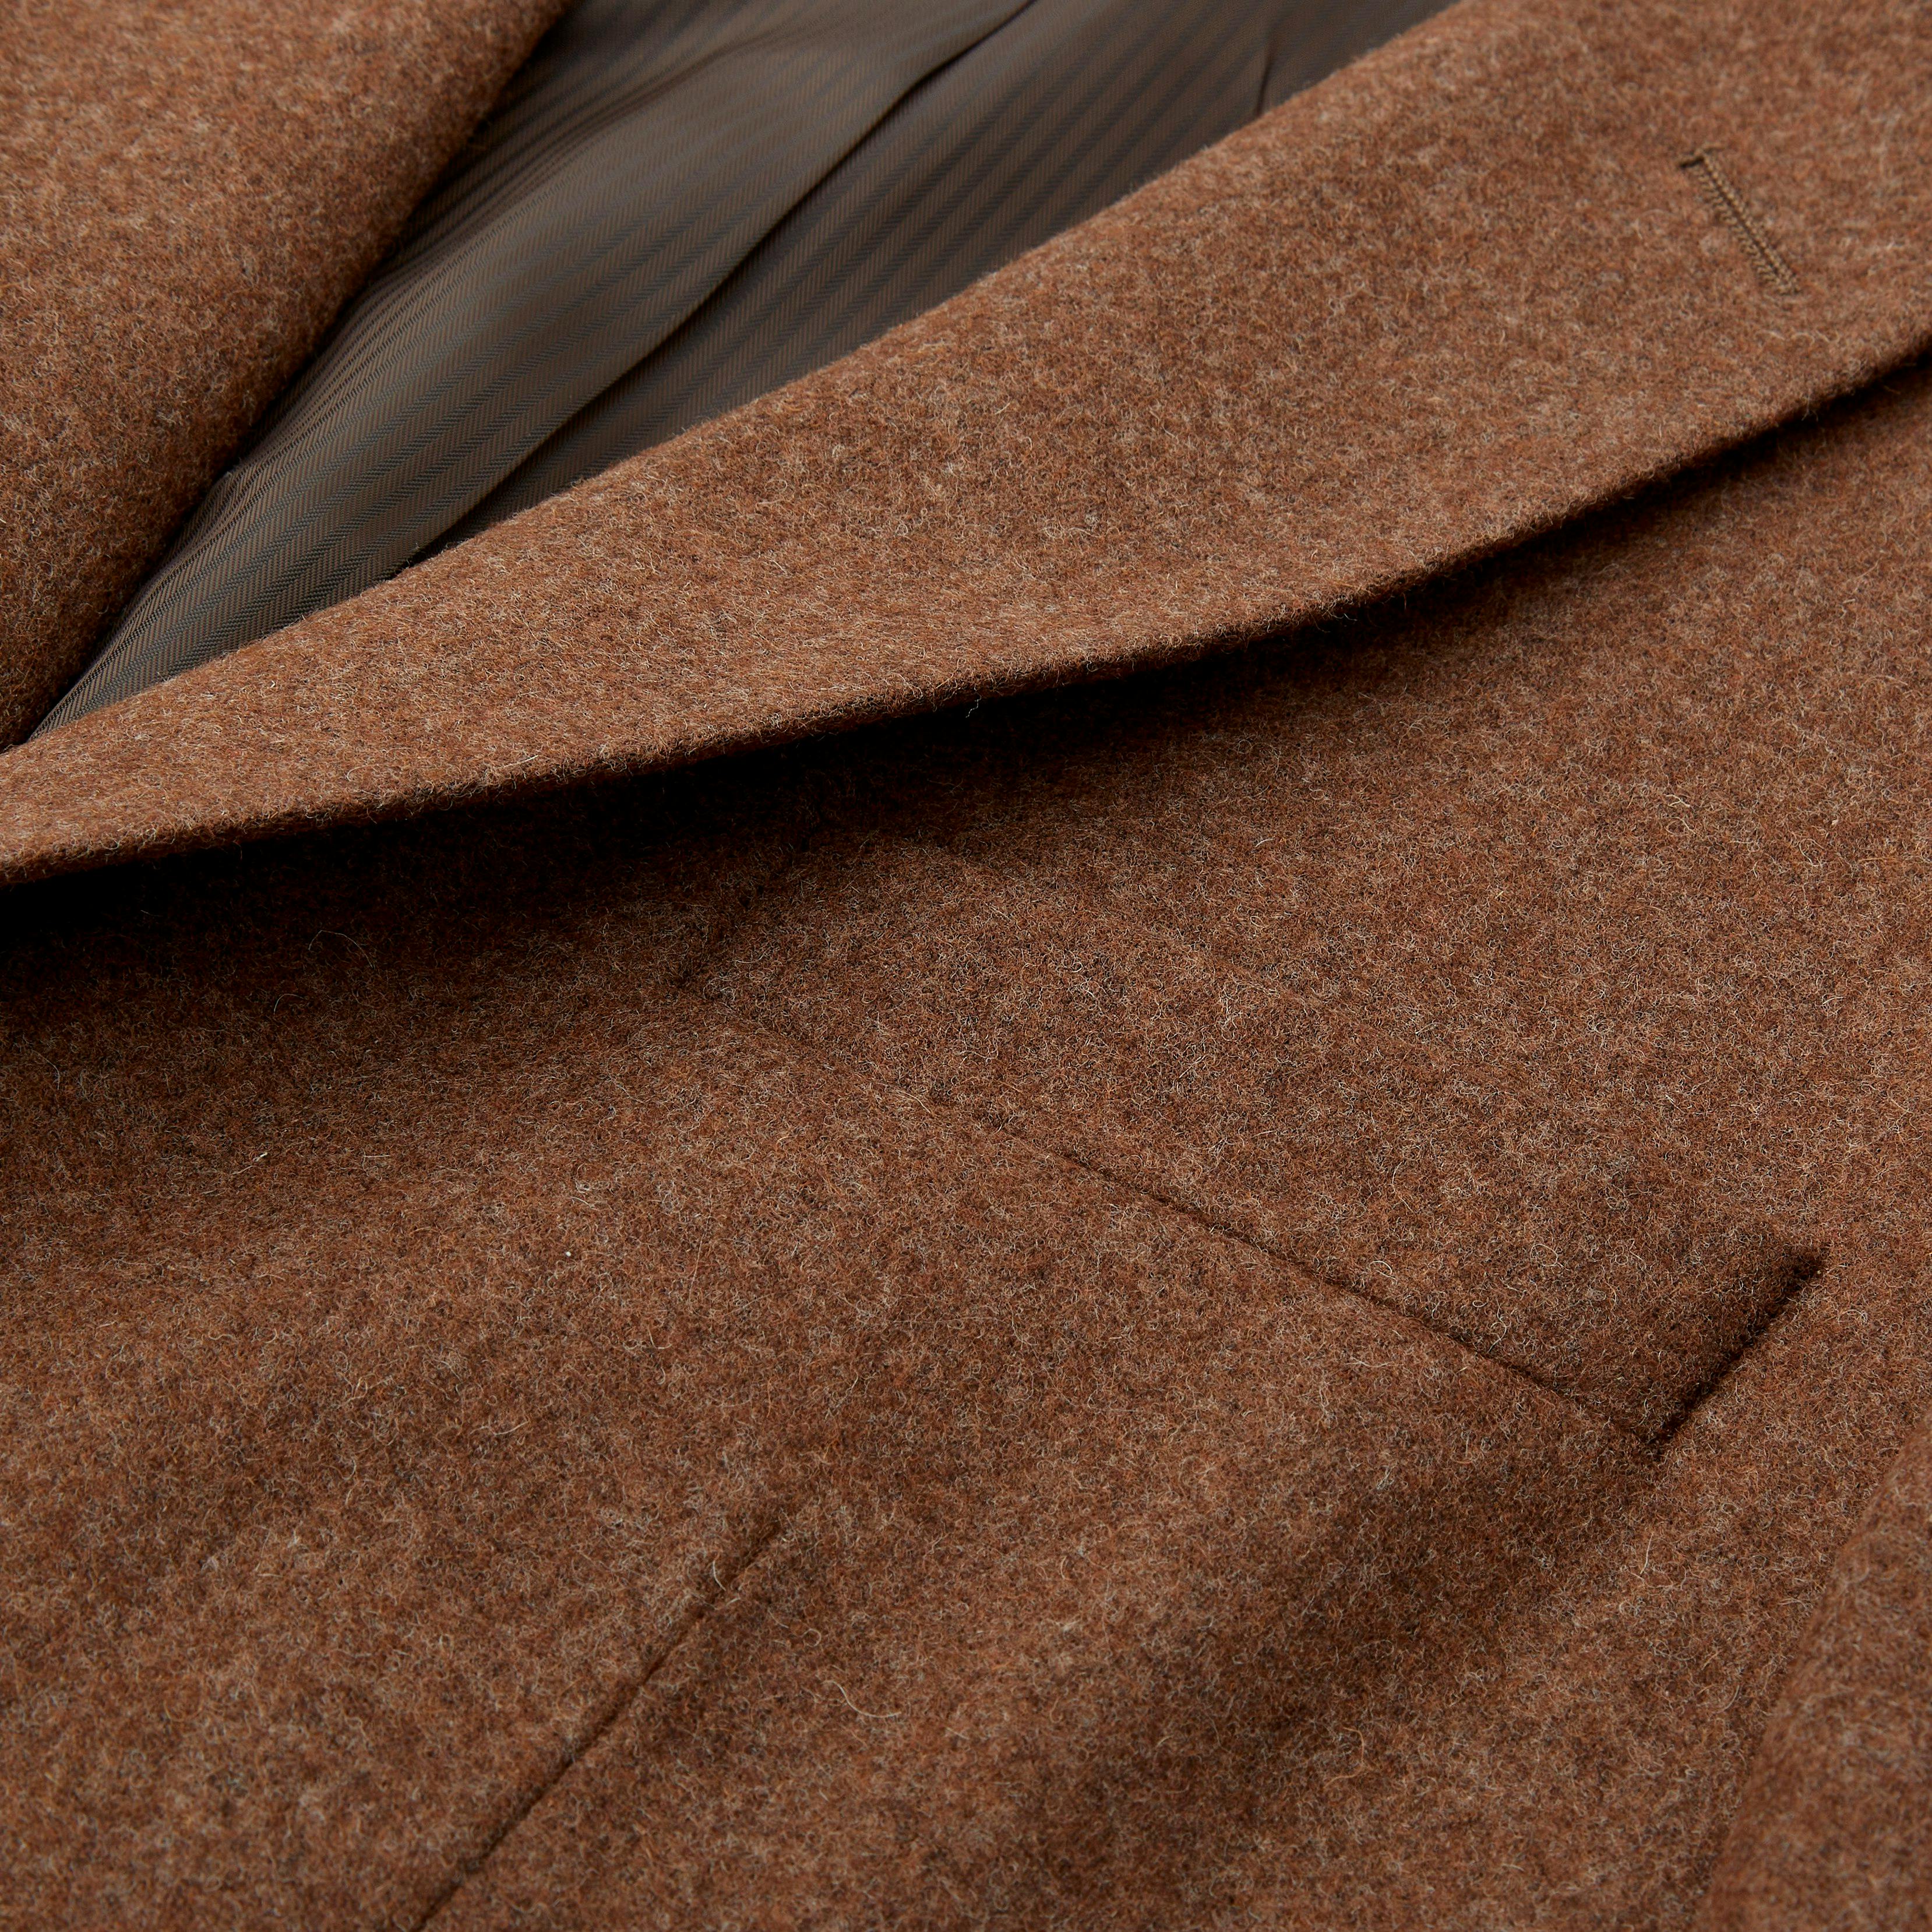 Brown and Black Heathered Herringbone Stretch Wool Suiting - Suiting - Wool  - Fashion Fabrics